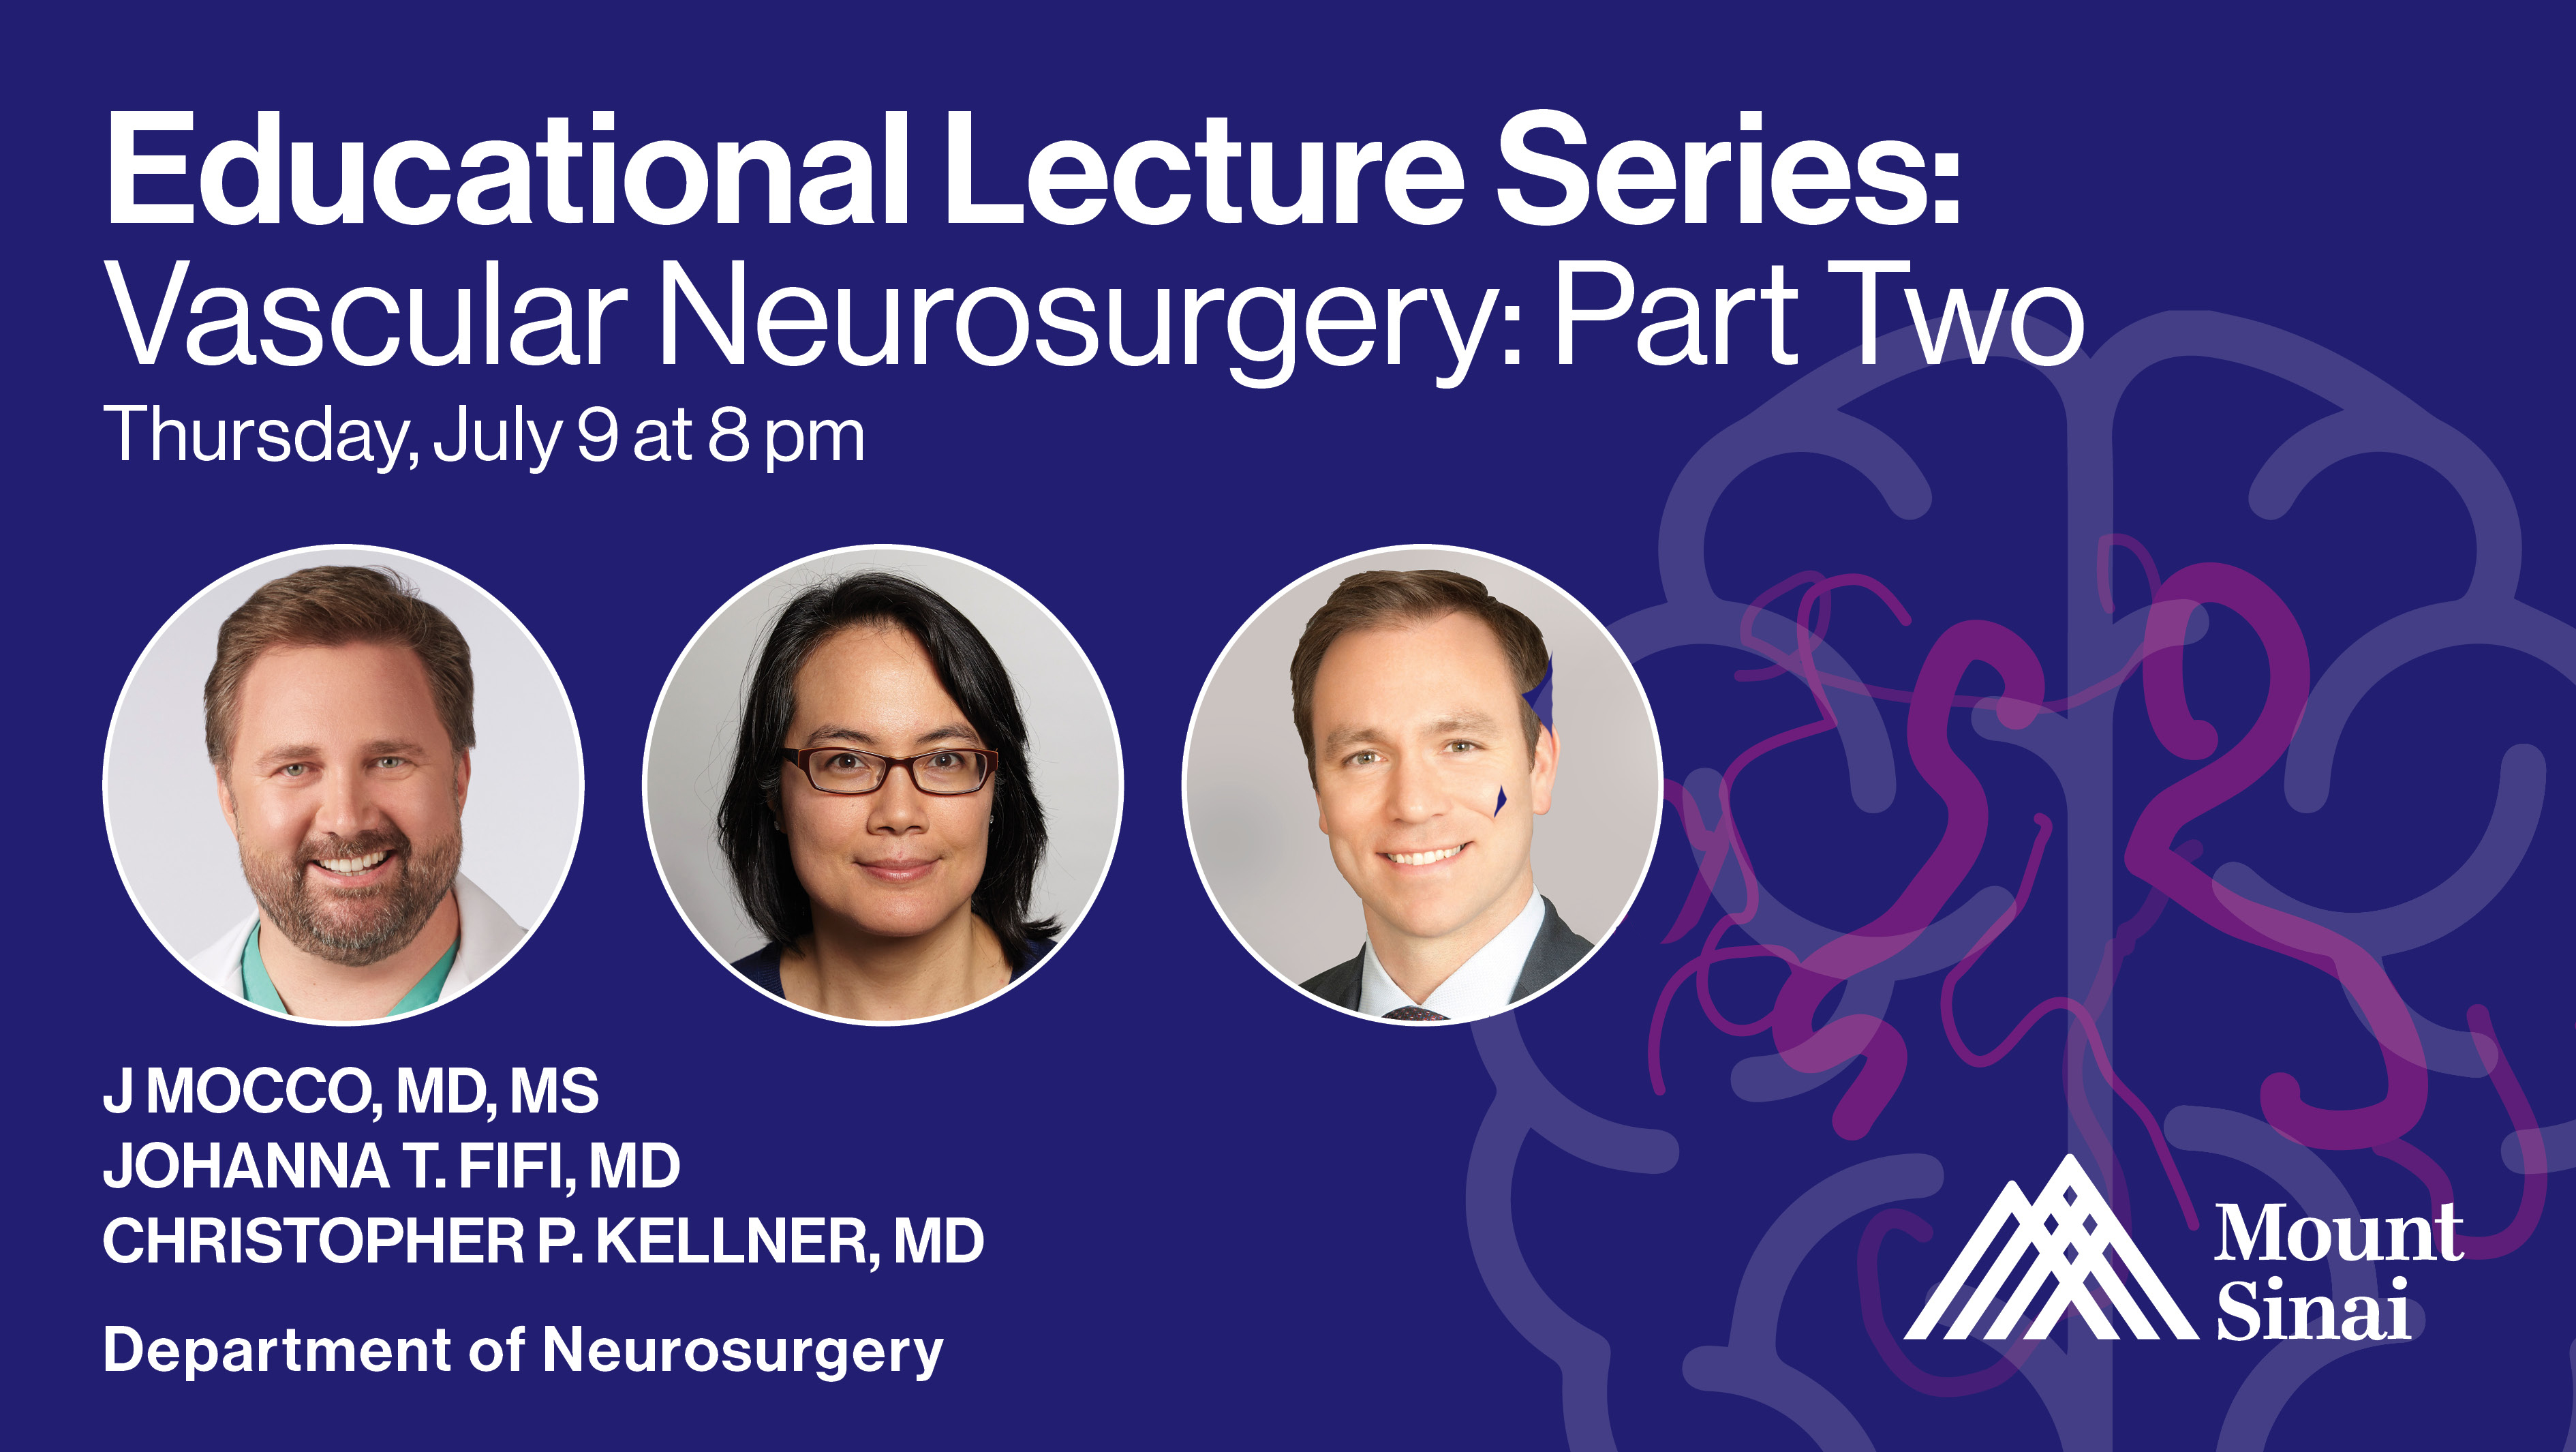 Mount Sinai Neurosurgery Educational Lecture Series: Vascular Neurosurgery: Part Two Thursday, July 9 at 8 pm J Mocco, MD, MS Johanna T. Fifi, MD Christopher P. Kellner, MD